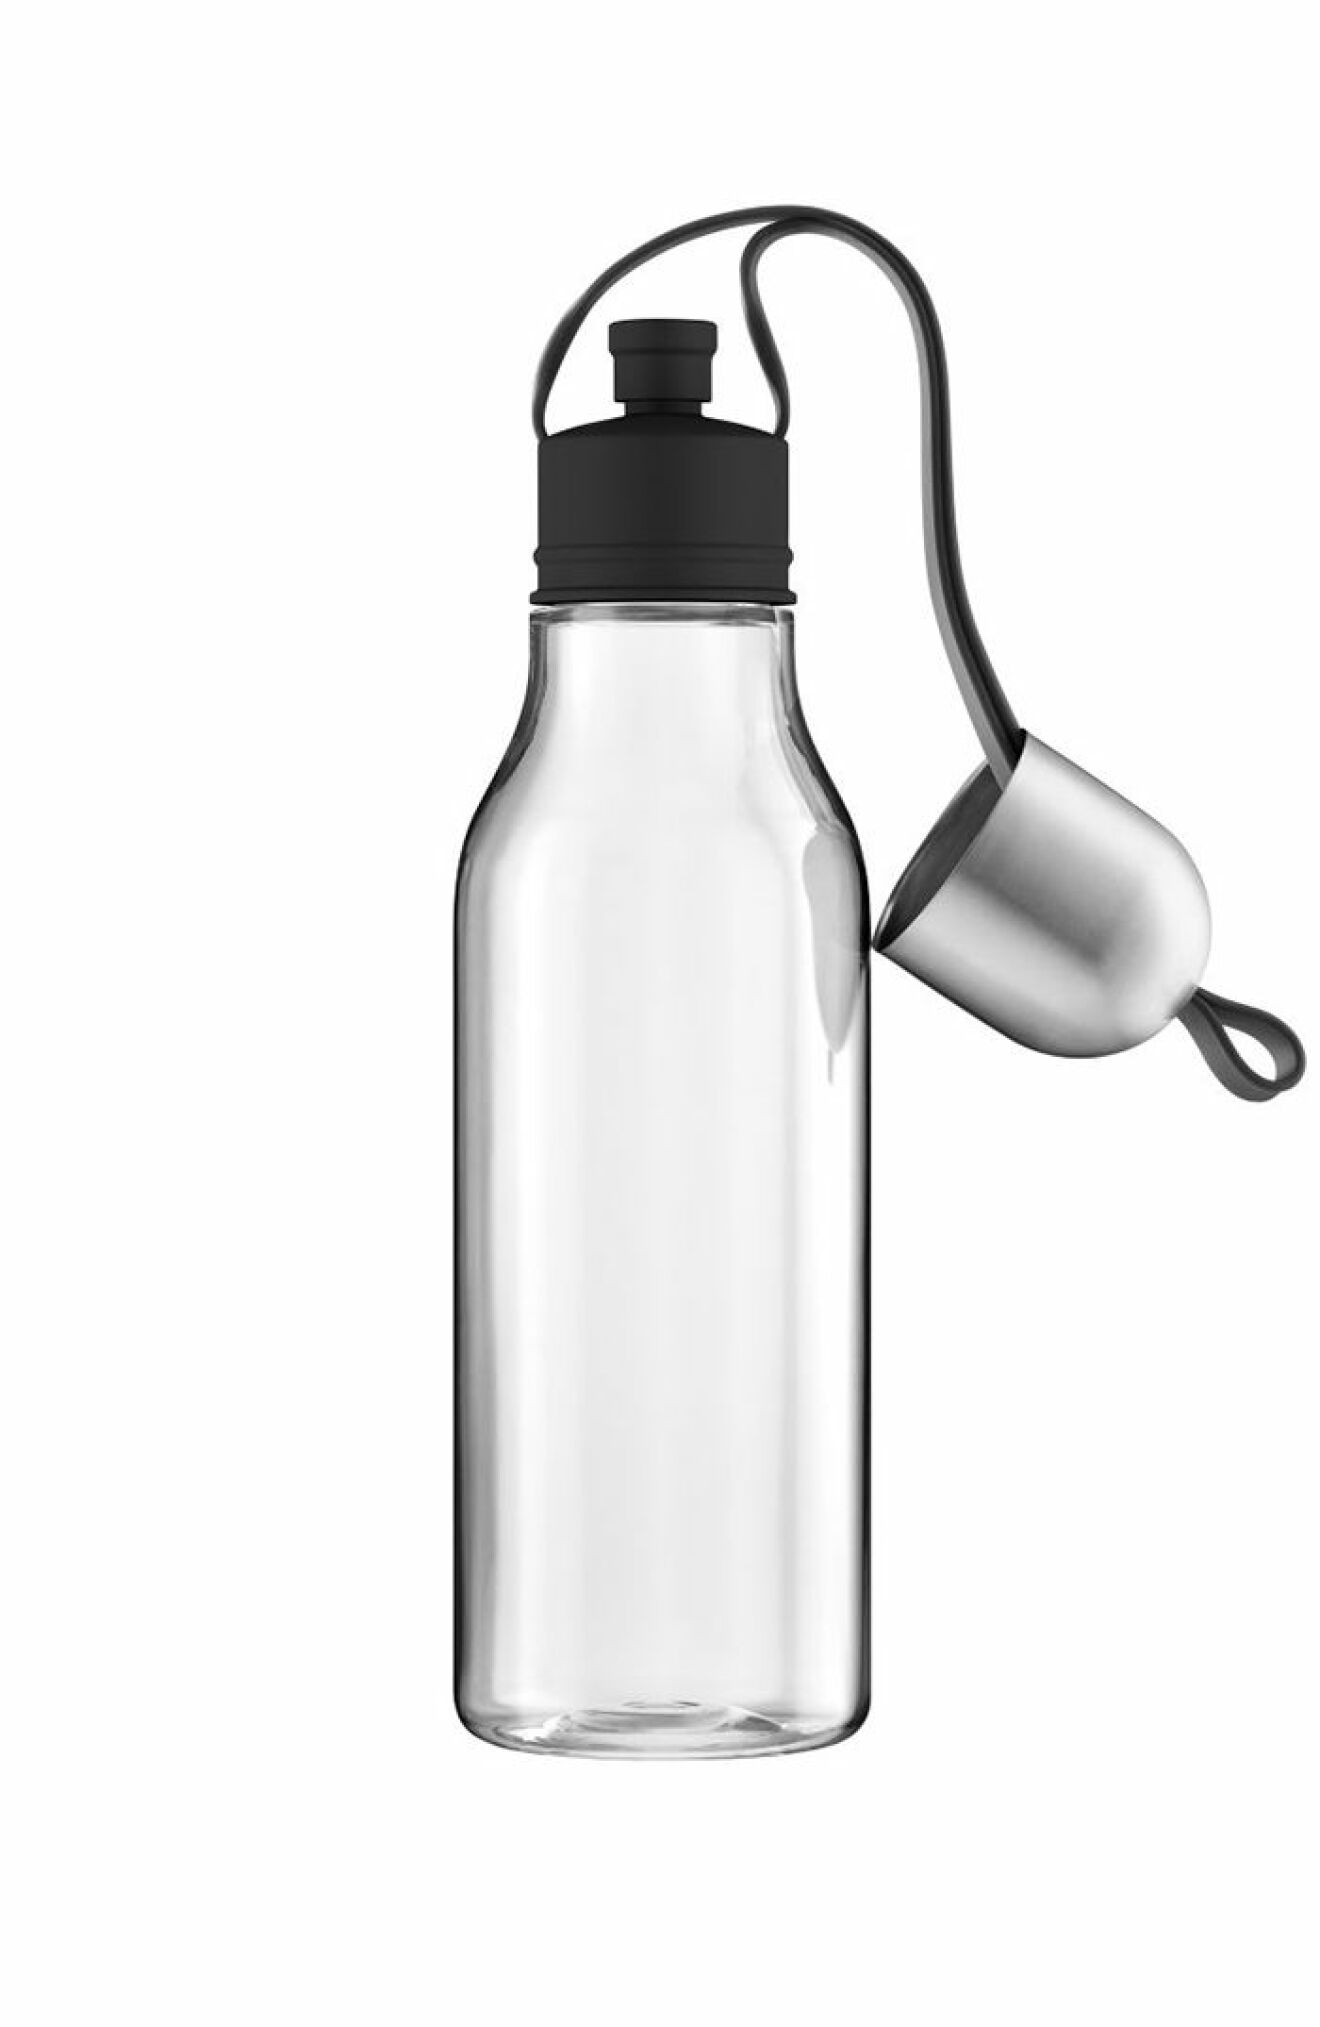 503005 Sports drinking bottle 70cl black open A up HIGH